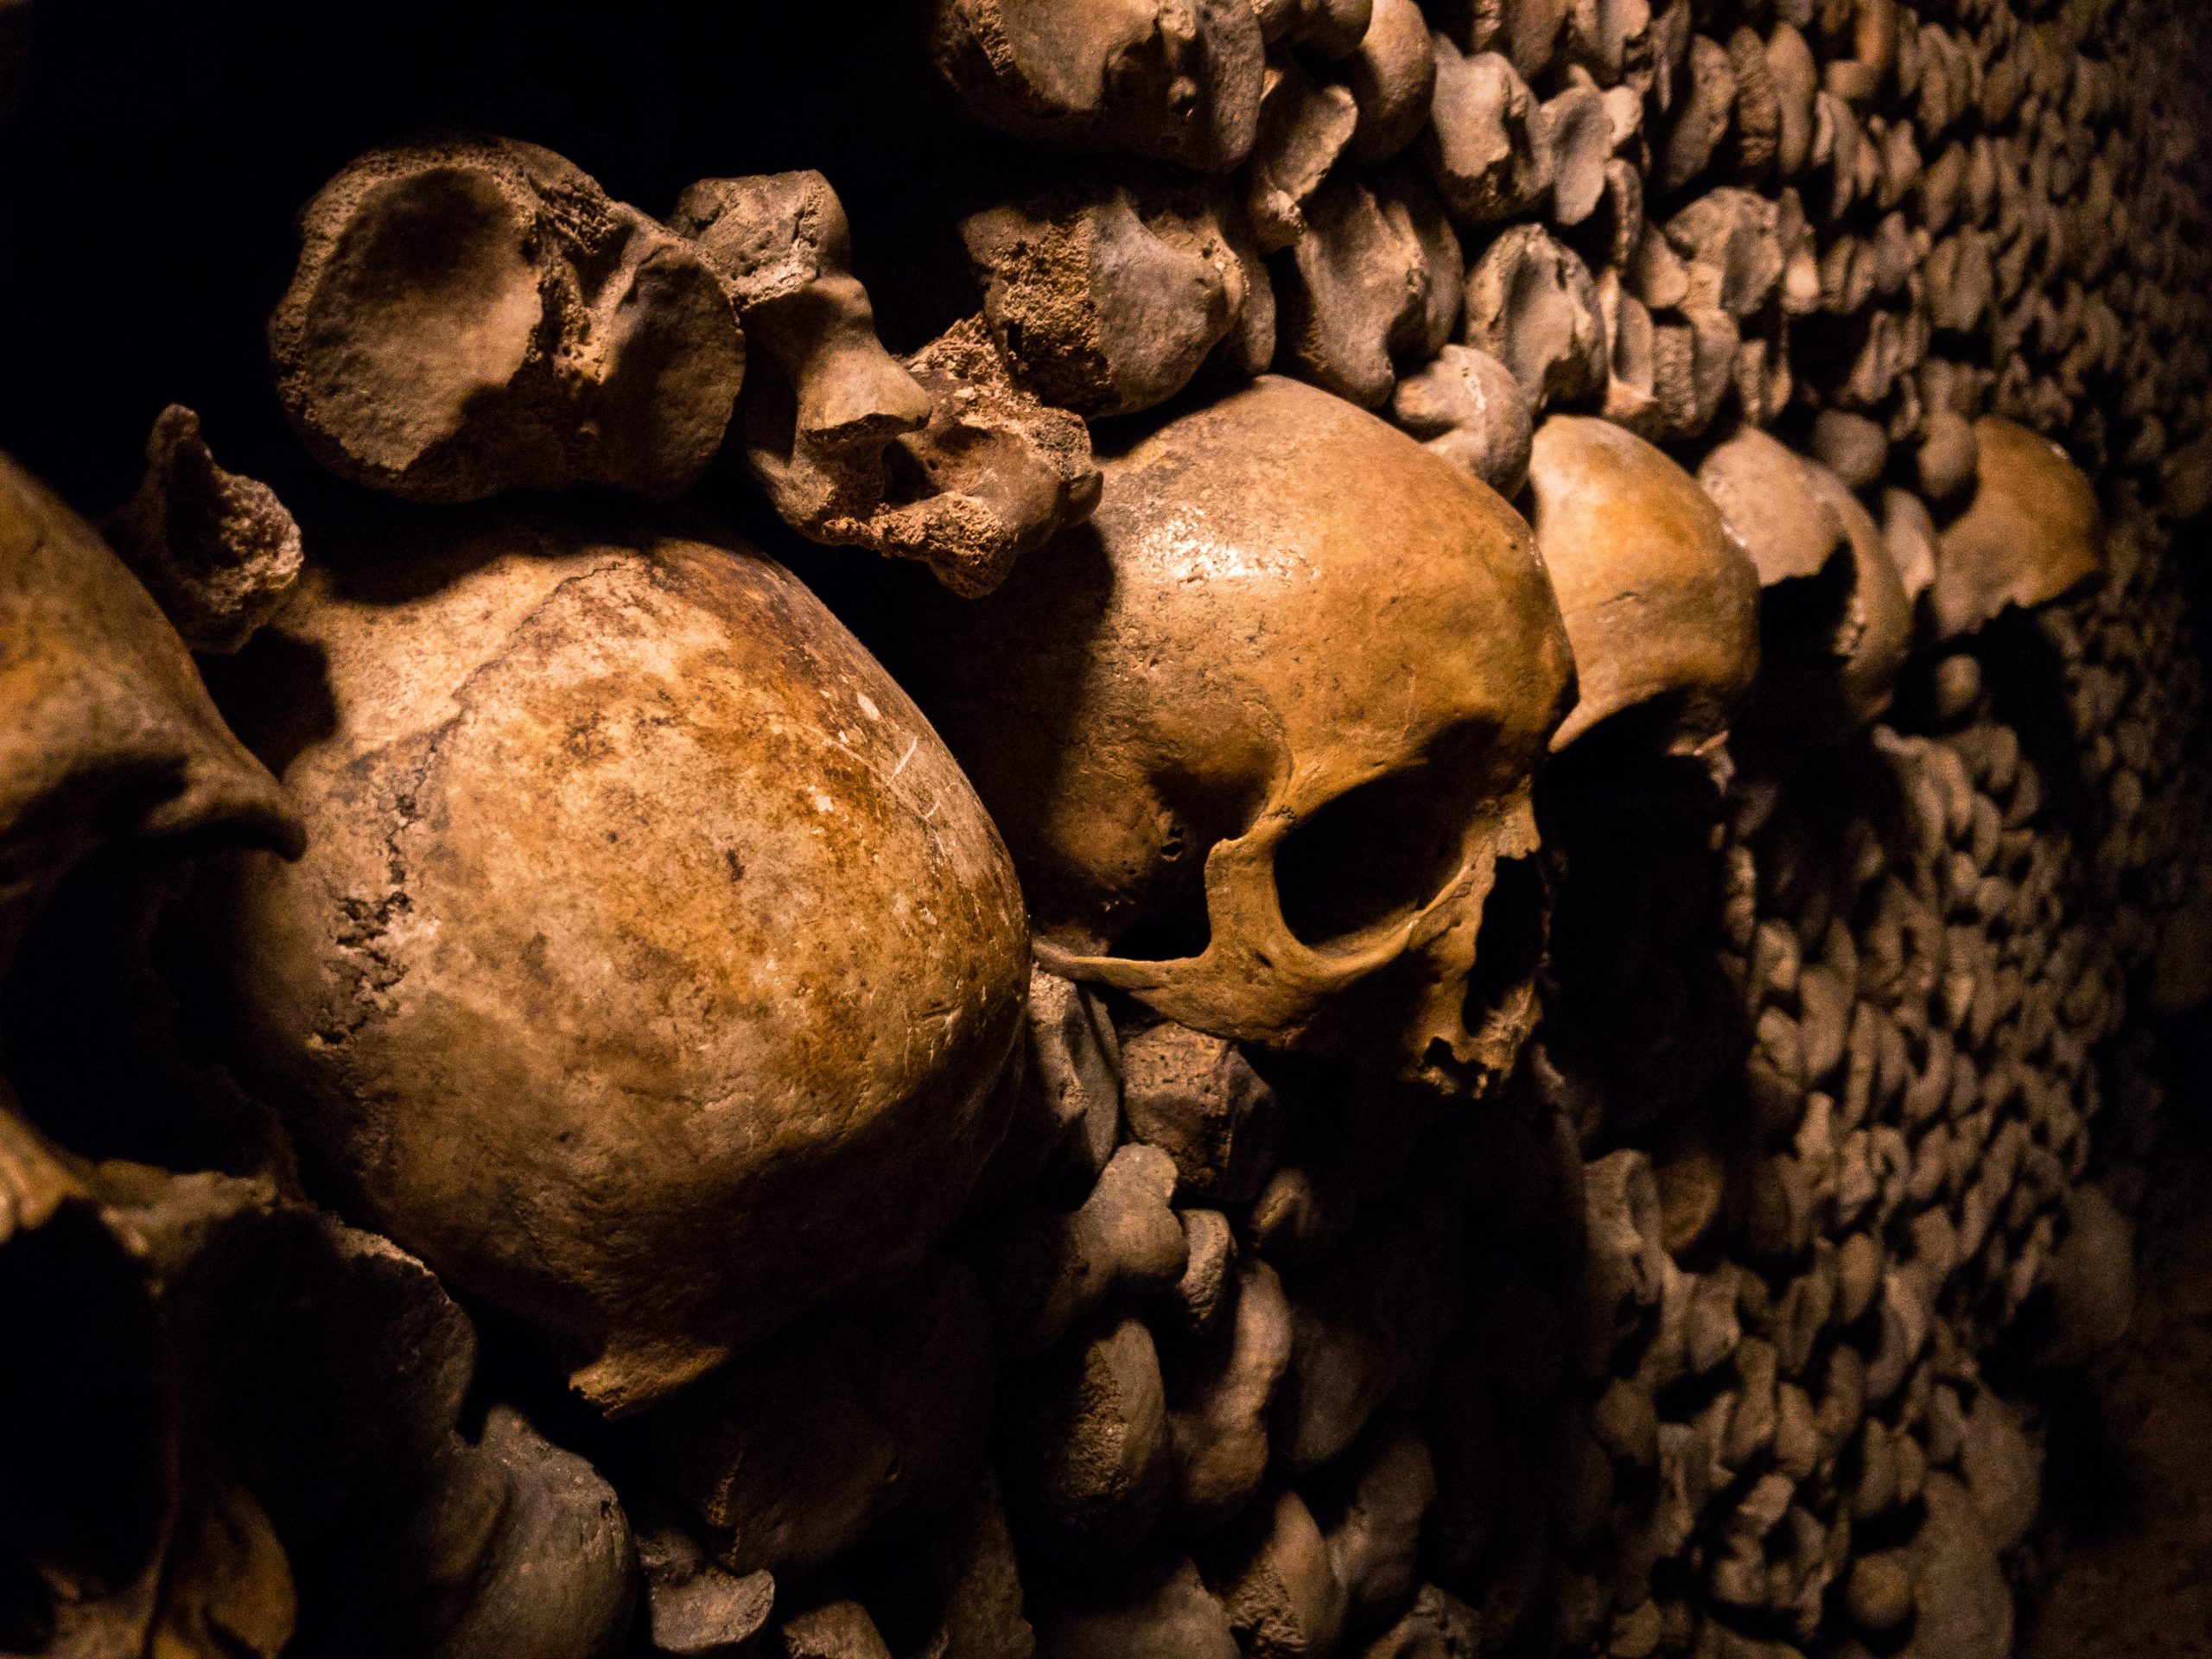 Unusual places to visit in Paris the catacombs